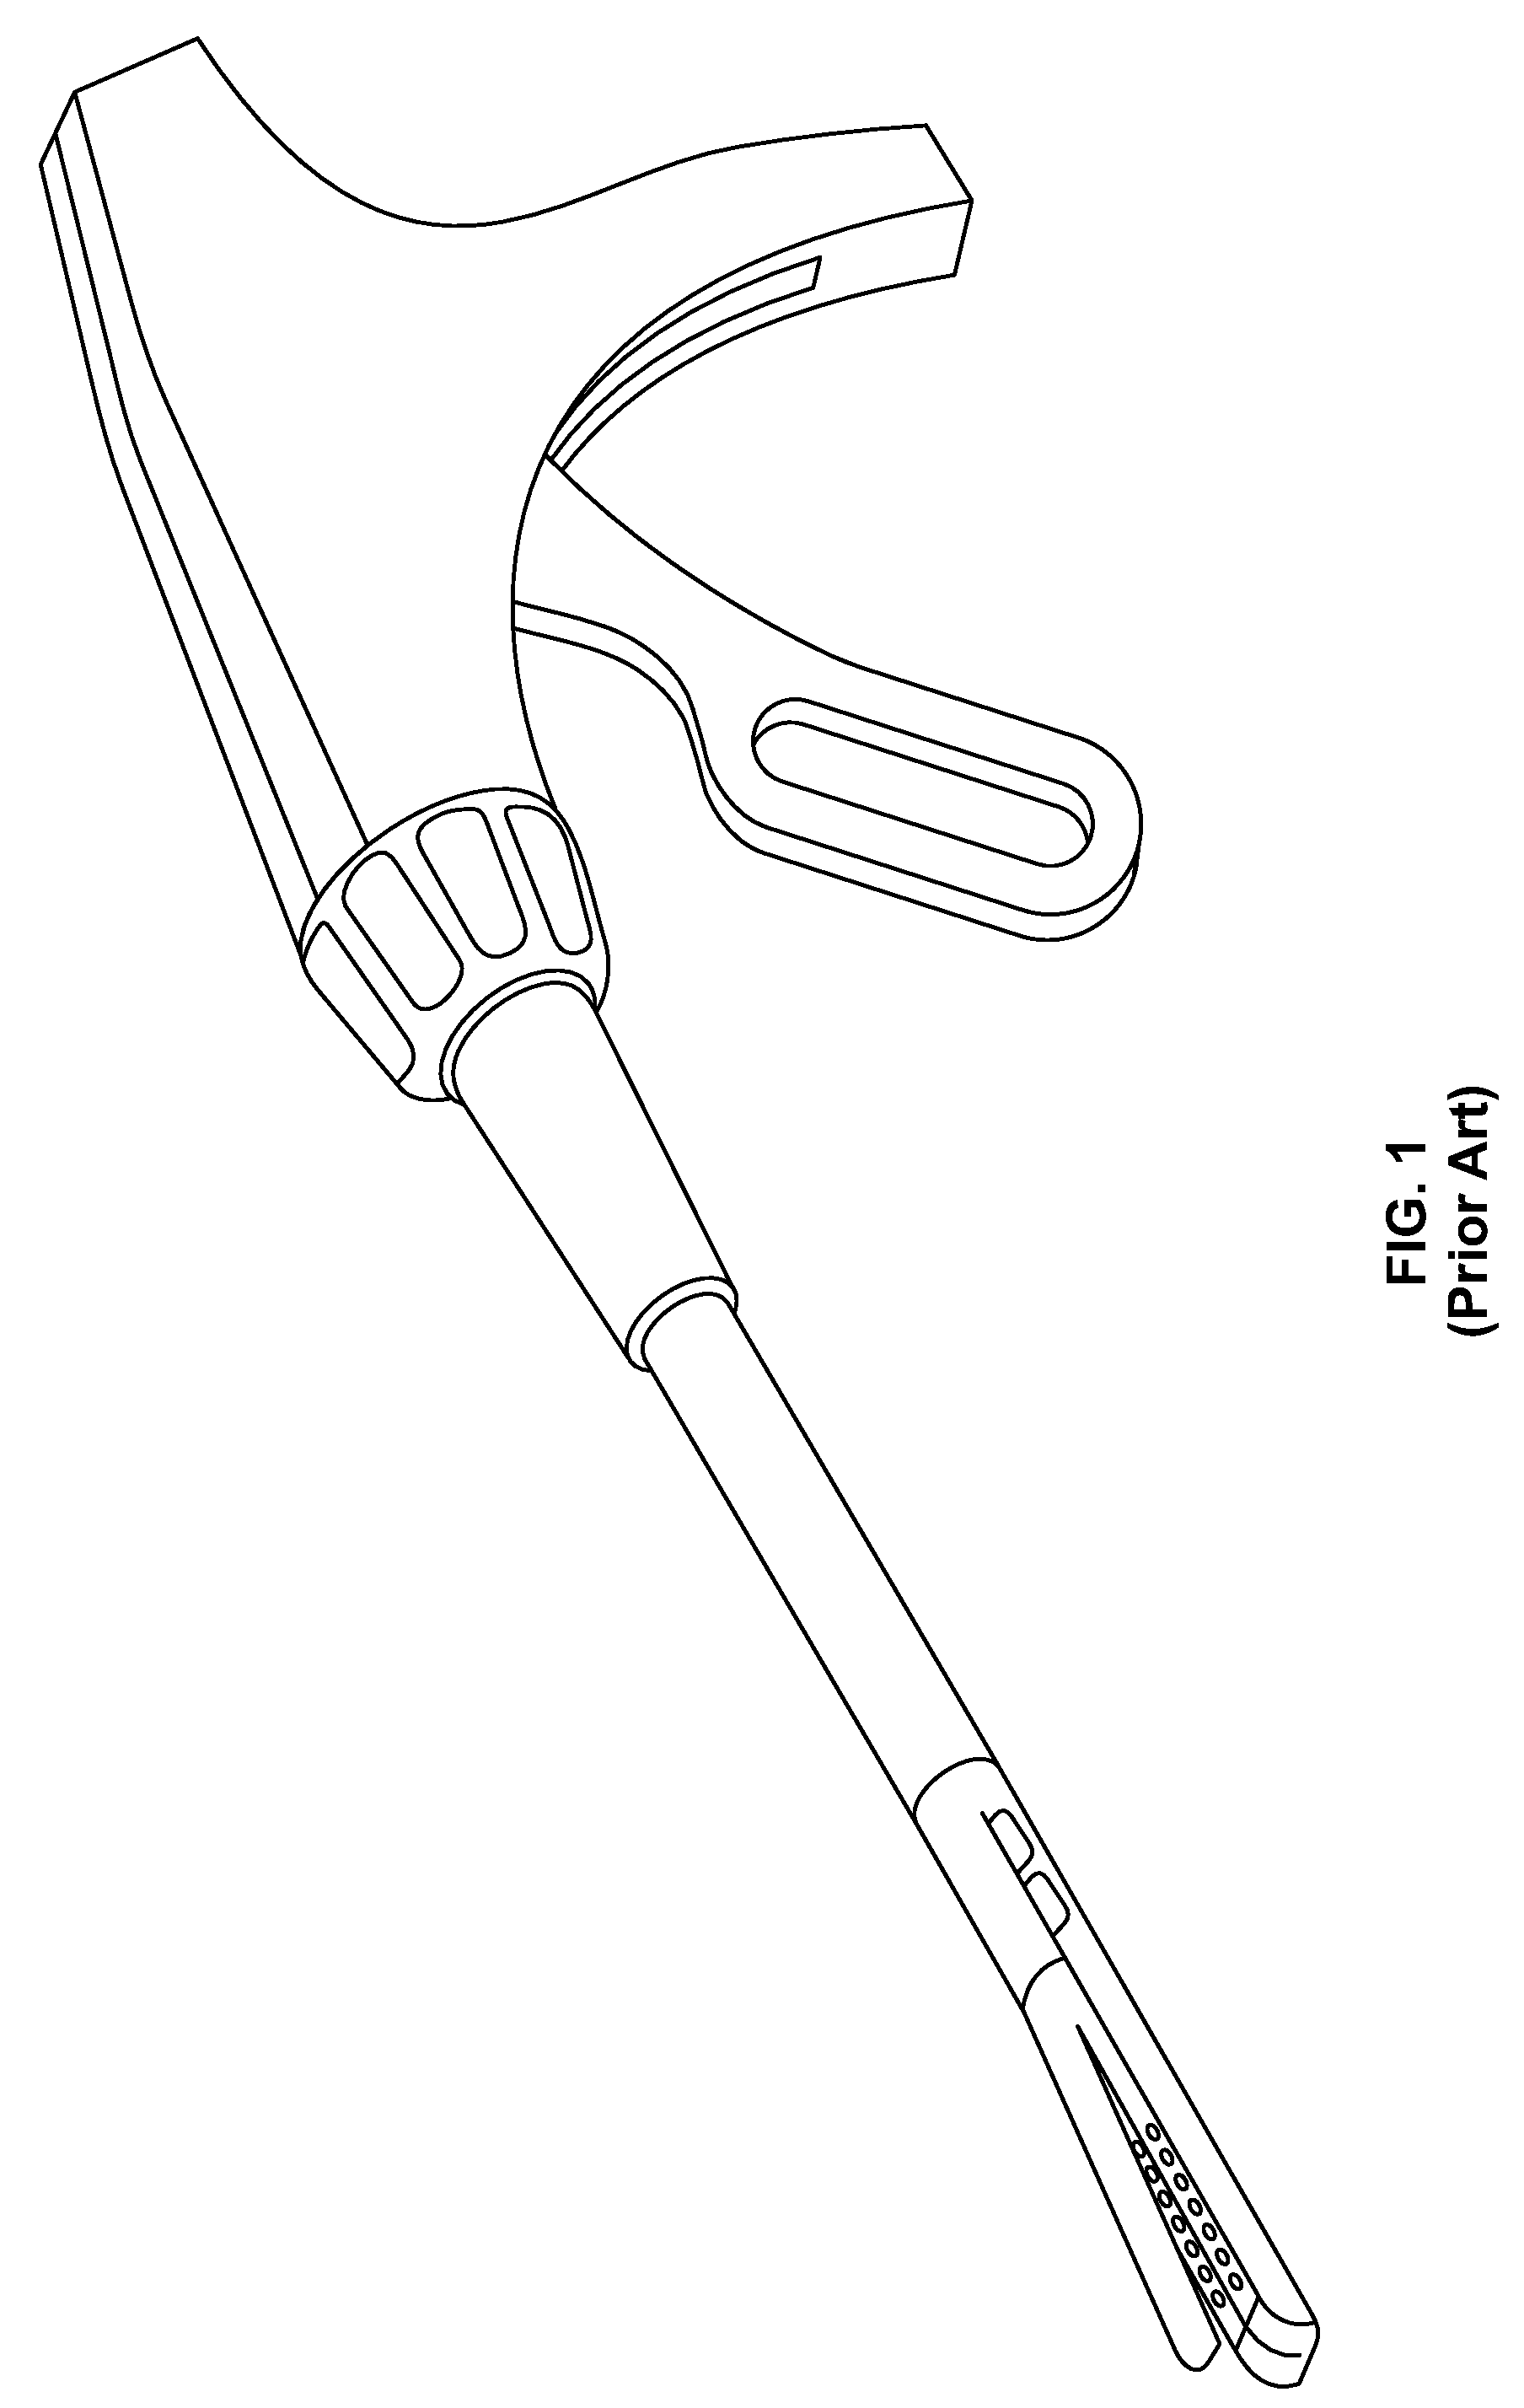 Surgical Device